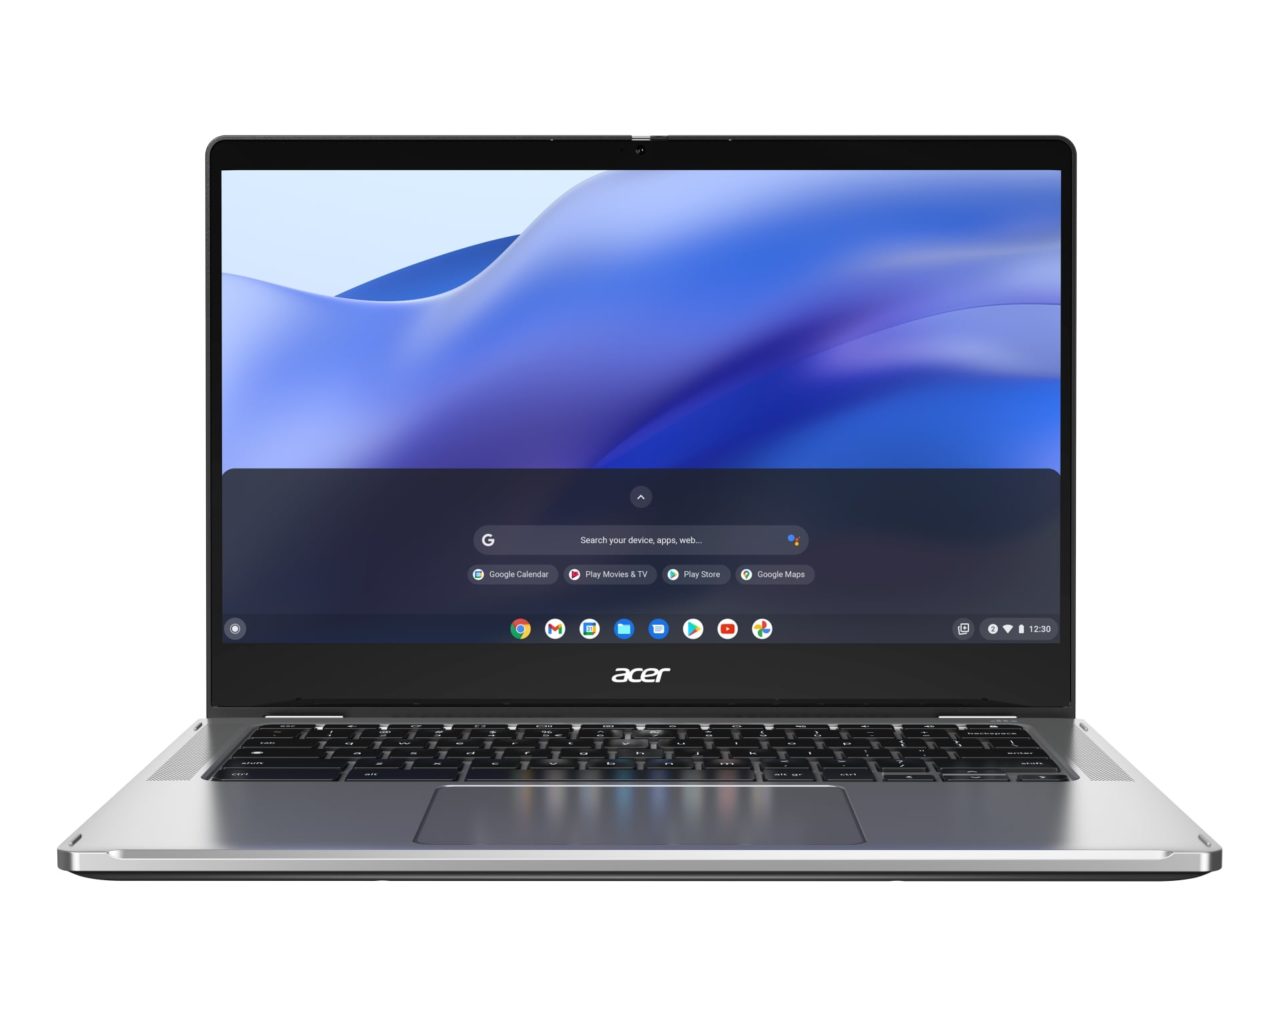 Front view of the new Acer Chromebook